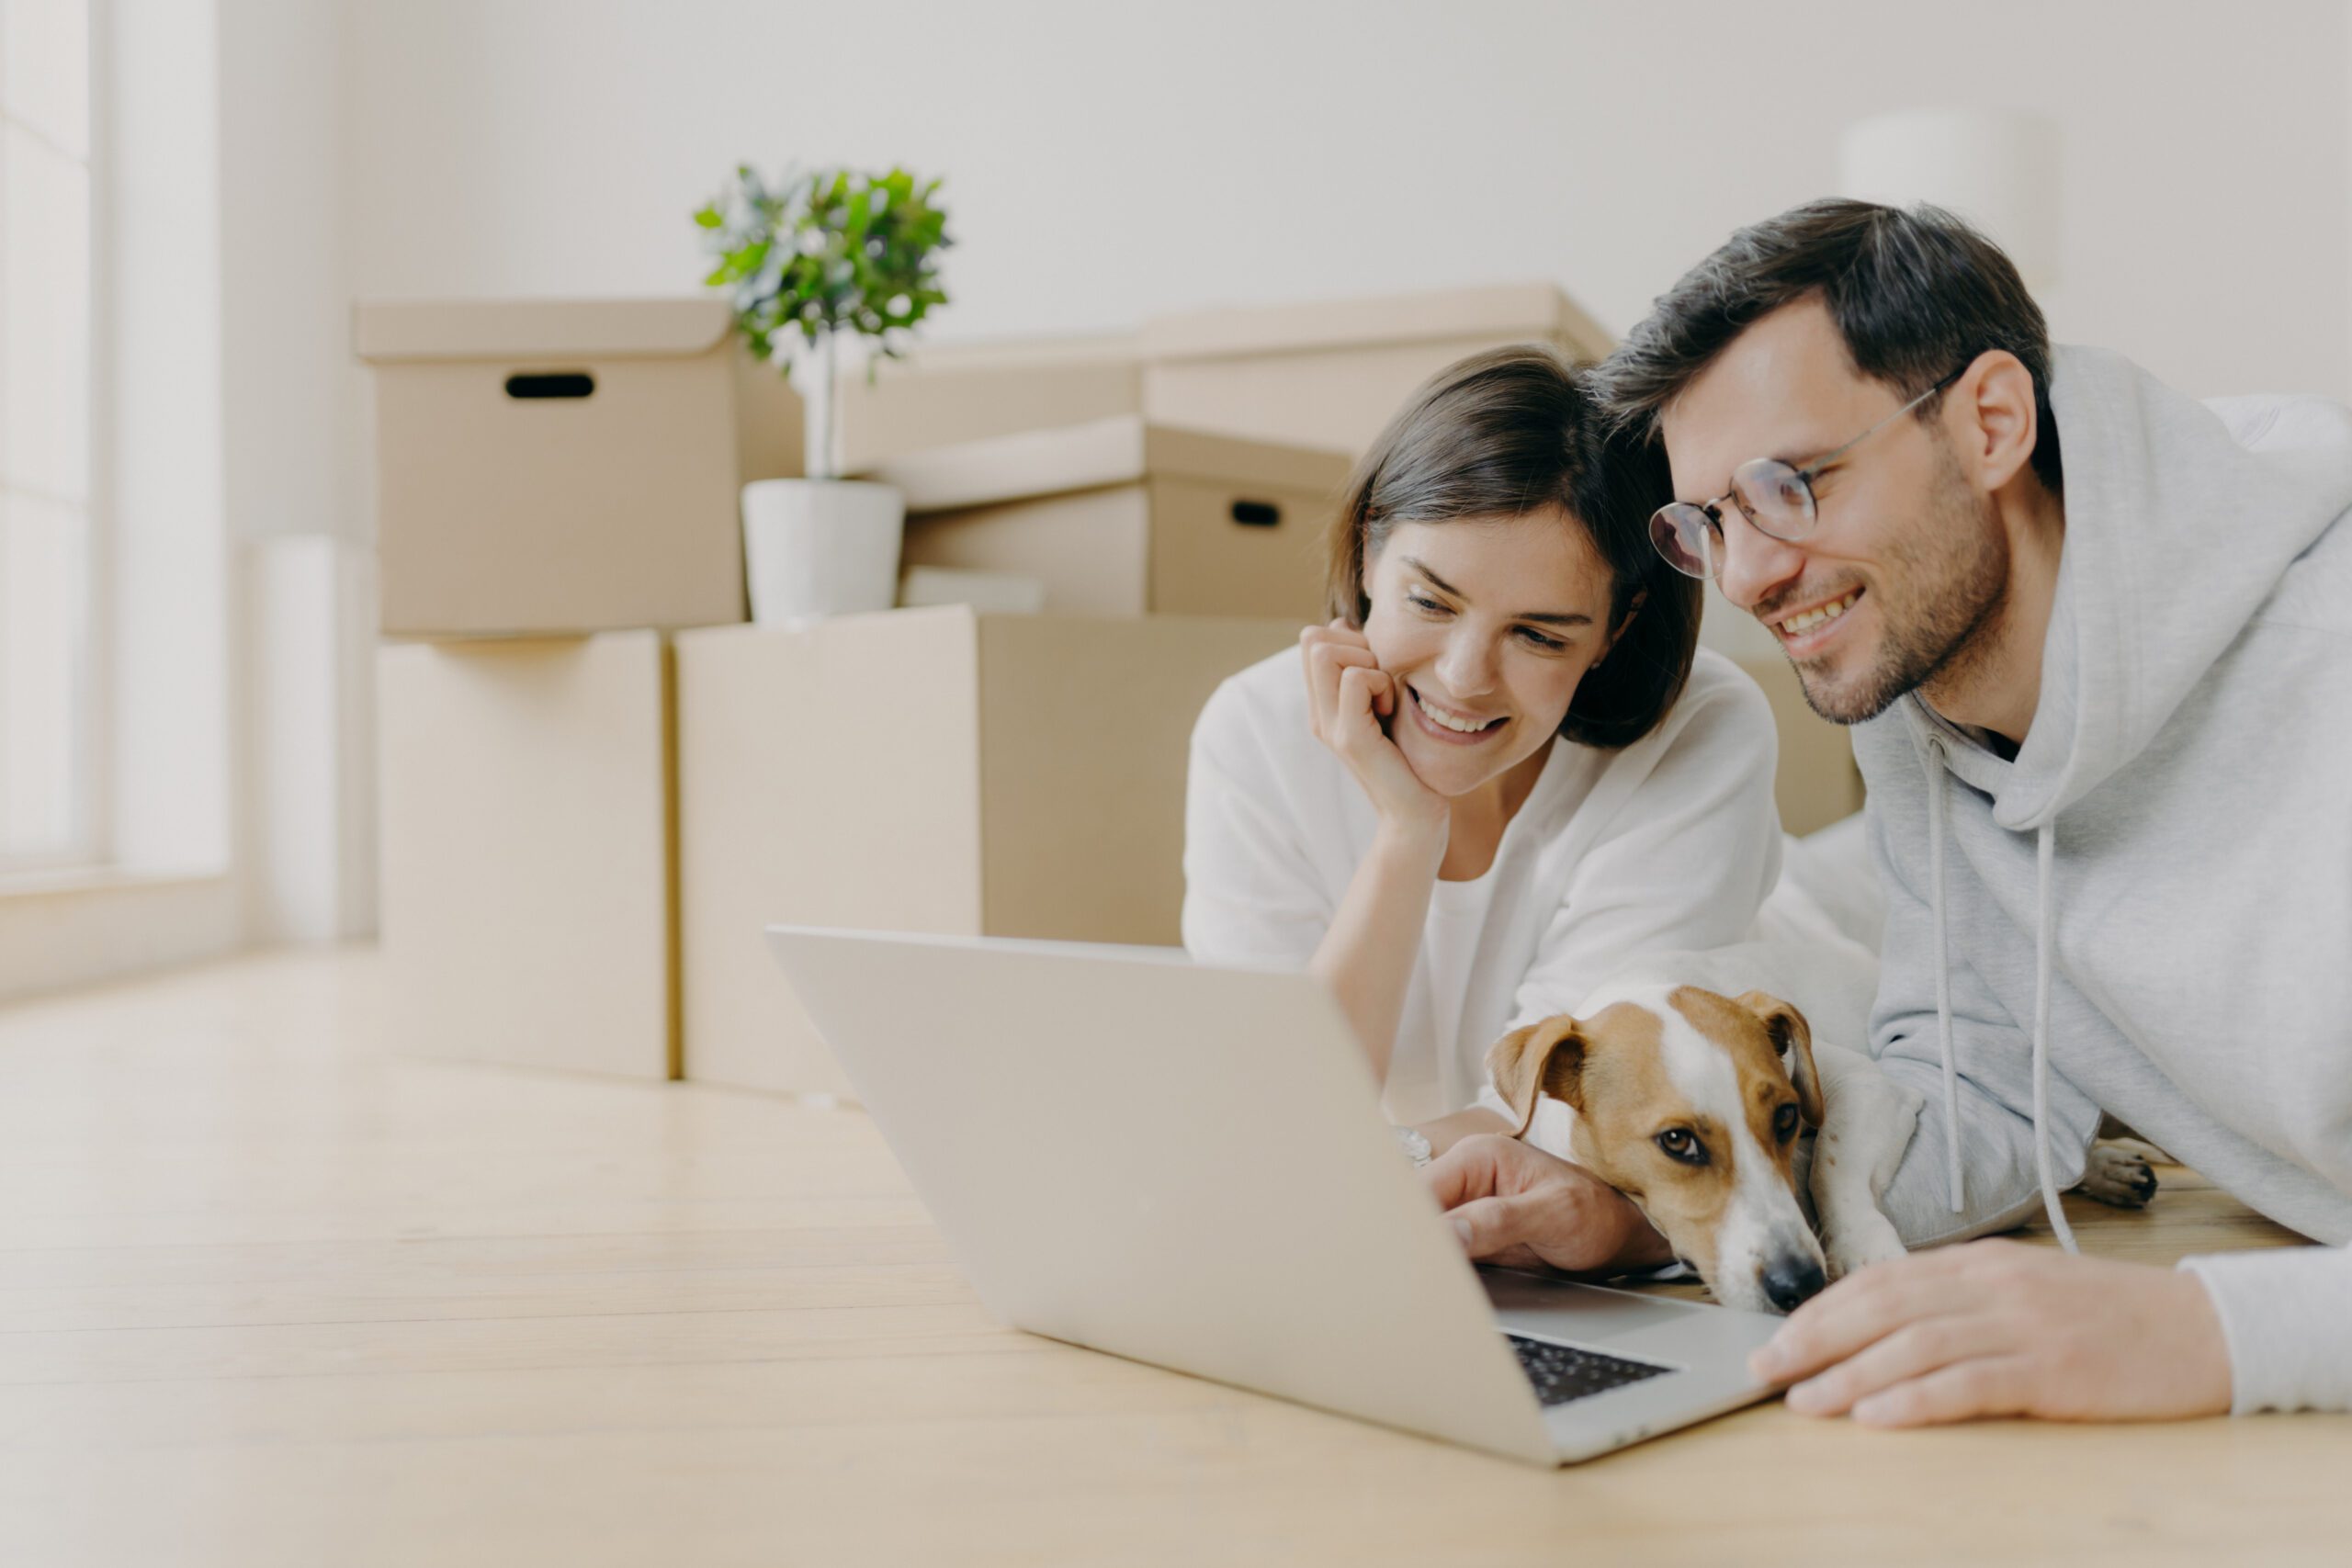 Glad young female and male discuss home repair projects, look attentively into laptop, their dog lies near, pose in living room on floor, dressed in casual clothes. People and new home concept